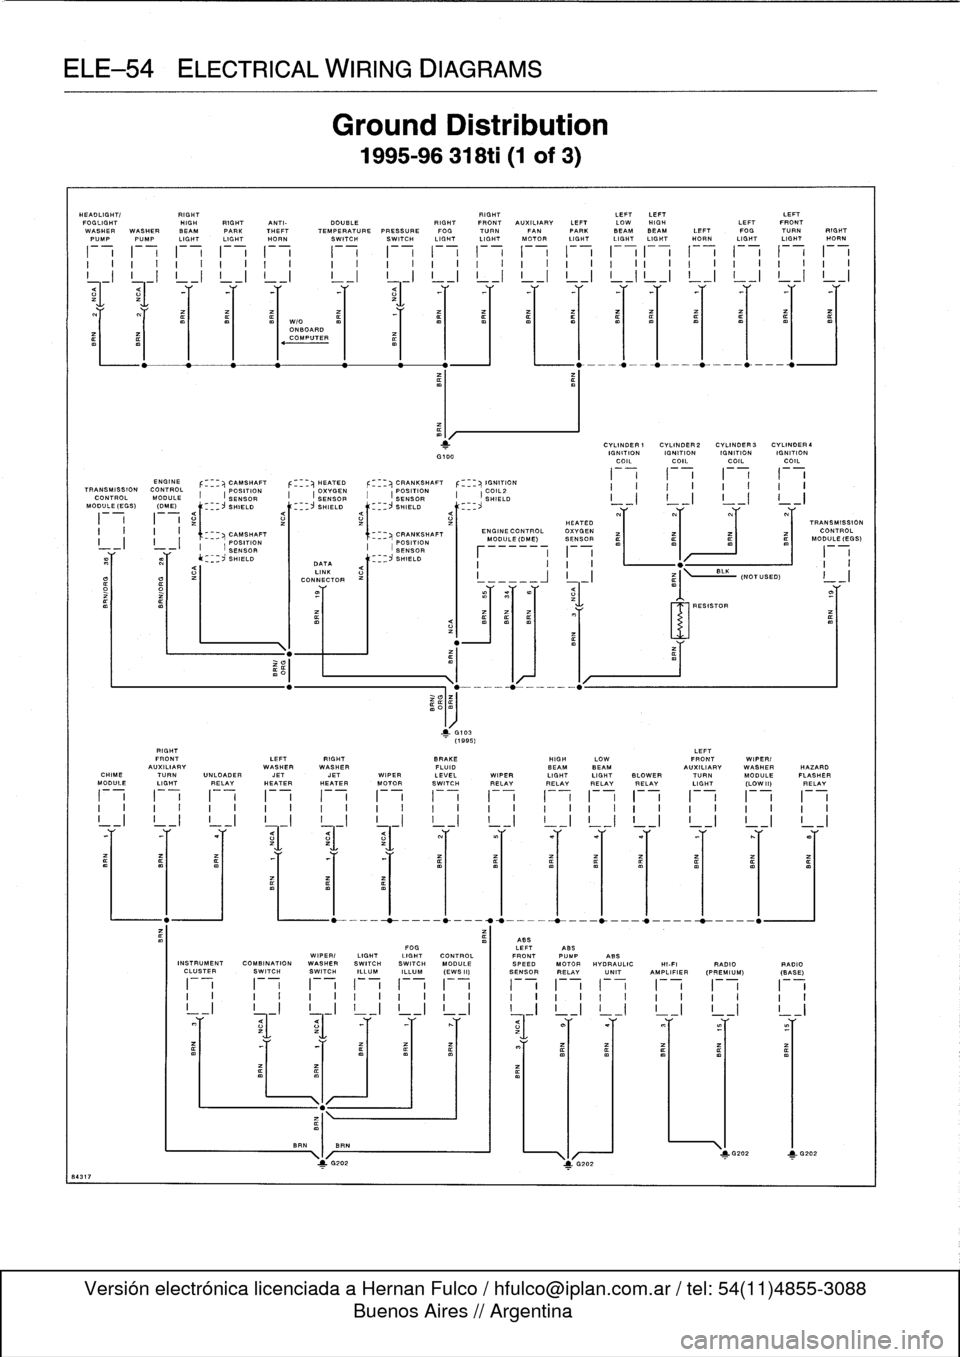 BMW 328i 1994 E36 Service Manual 
ELE-54
ELECTRICAL
WIRING
DIAGRAMS

HEADLIGHT/

	

RIGHT

	

RIGHT

	

LEFTLEFT

	

LEFT
FOGLIGHT

	

HIGH
RIGHT
ANTI-

	

DOUBLE

	

RIGHT
FRONT
AUXILIARY
LEFT
LOW
HIGH

	

LEFT
FRONT
WASHER
WASHER
B